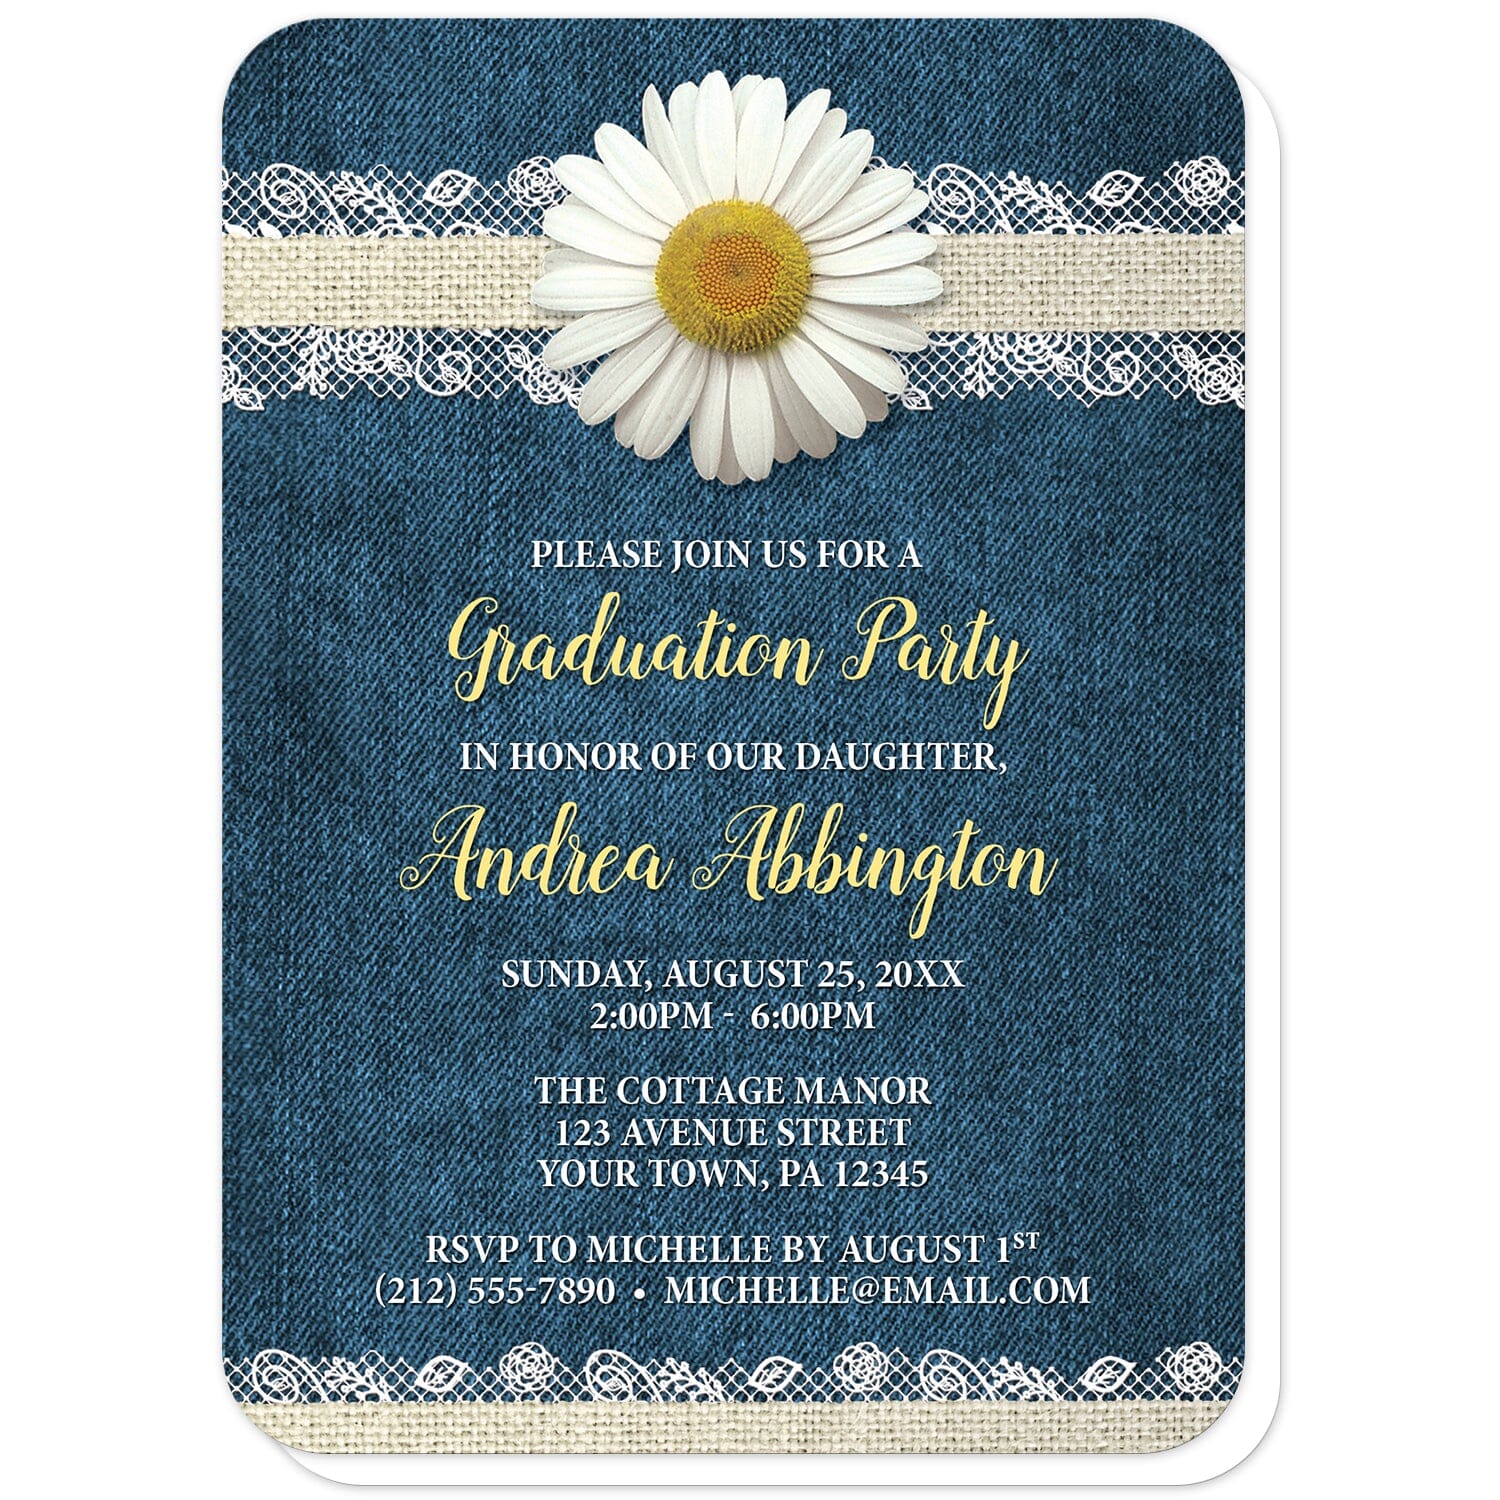 Daisy Burlap and Lace Denim Graduation Invitations (with rounded corners) at Artistically Invited. Daisy burlap and lace denim graduation invitations with a white daisy flower image centered at the top on a burlap and lace ribbon strip illustration. Your personalized graduation celebration details are custom printed in yellow and white over a blue denim background. They're the perfect invitations for when the graduate loves daisies. 